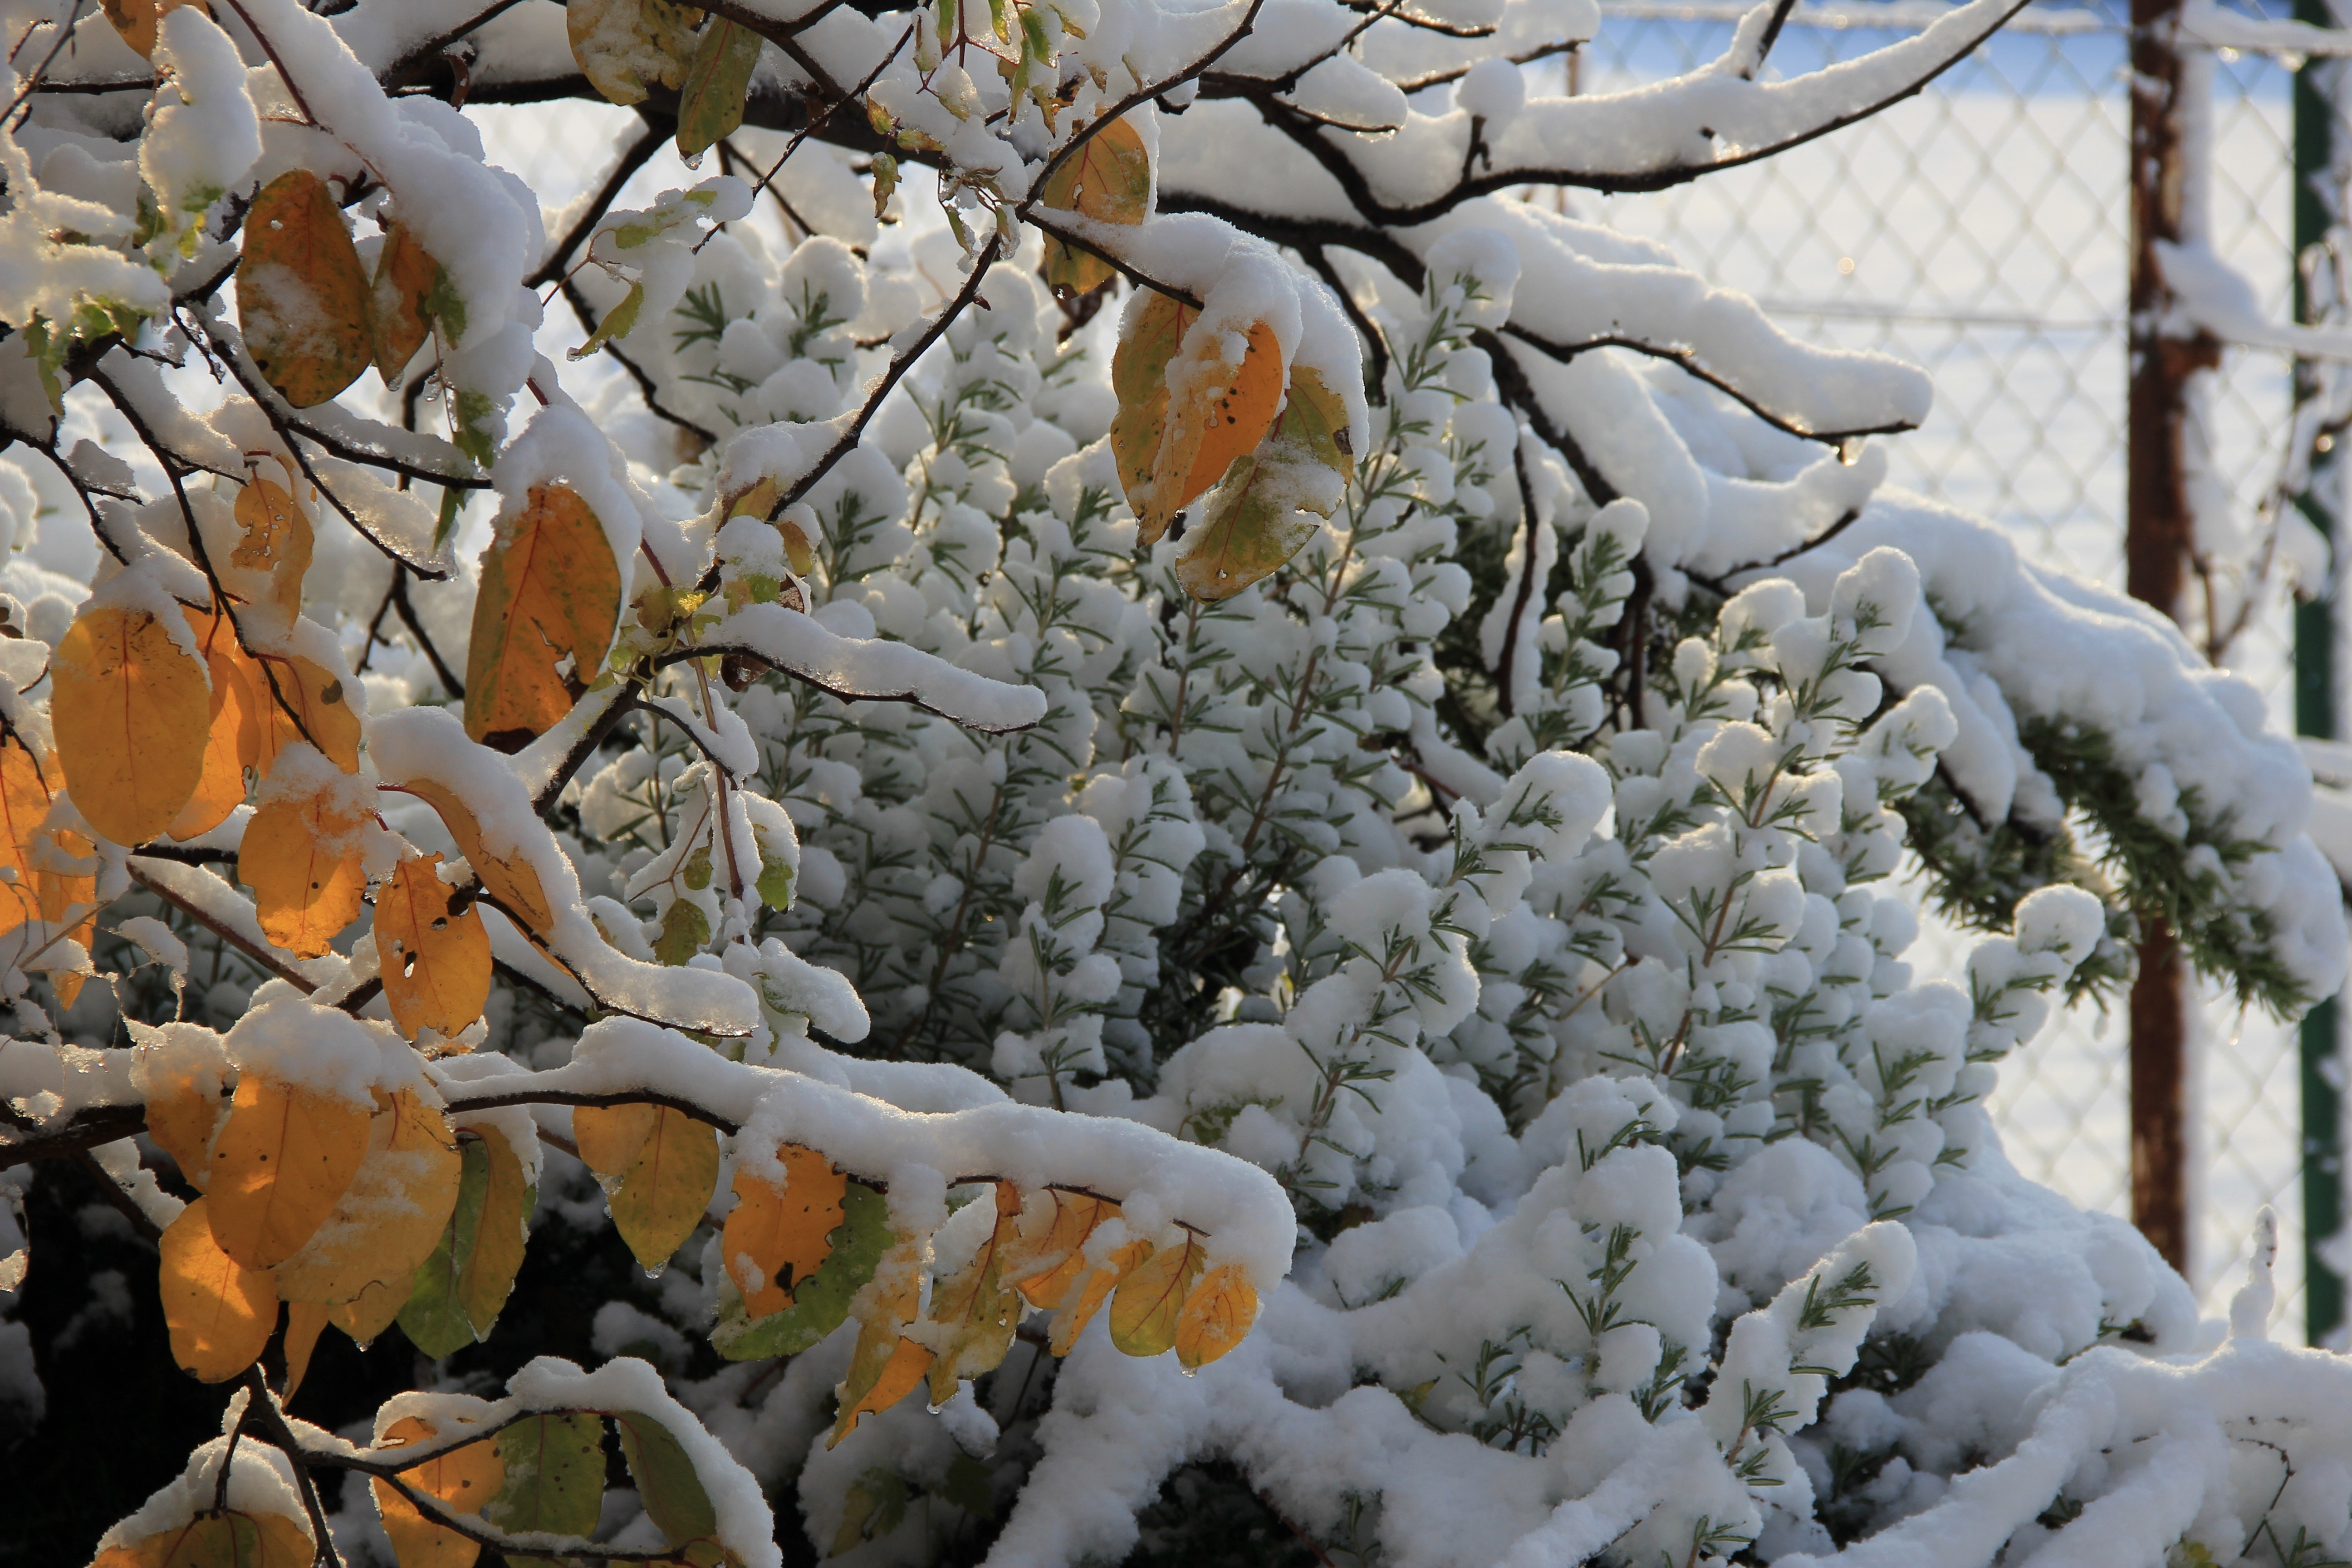 snow covered plants